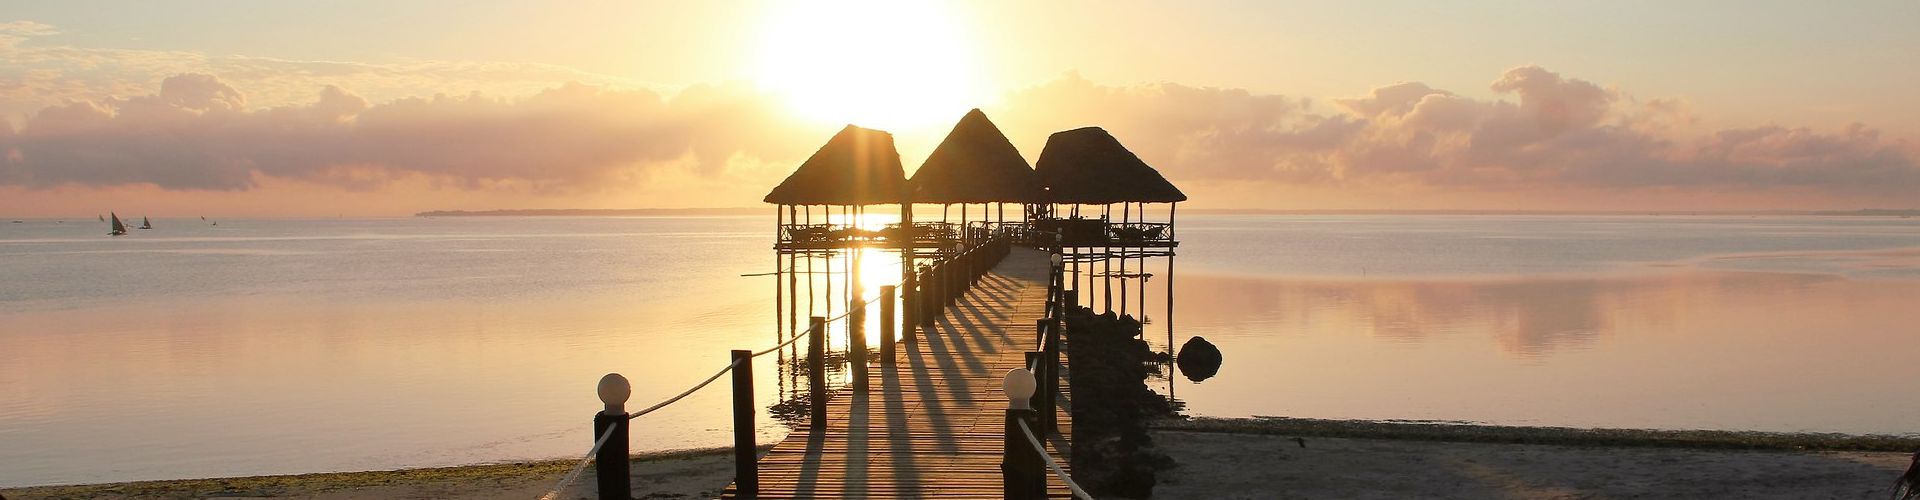 Relaxing at the beach and enjoying the sunset is just one of the things to do in Zanzibar